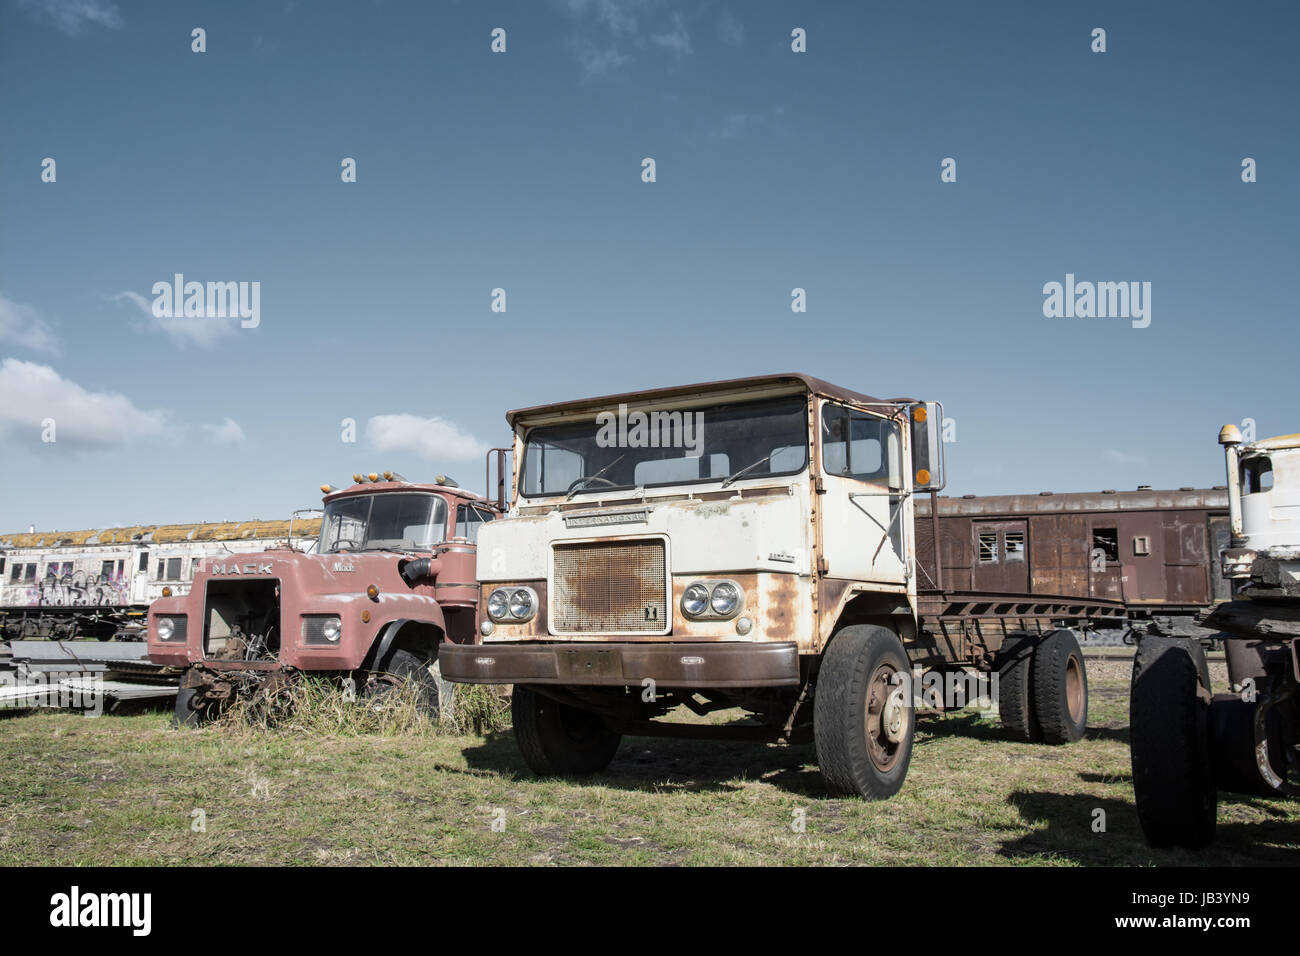 Two Derelict Trucks in a Vehicle Graveyard. Stock Photo